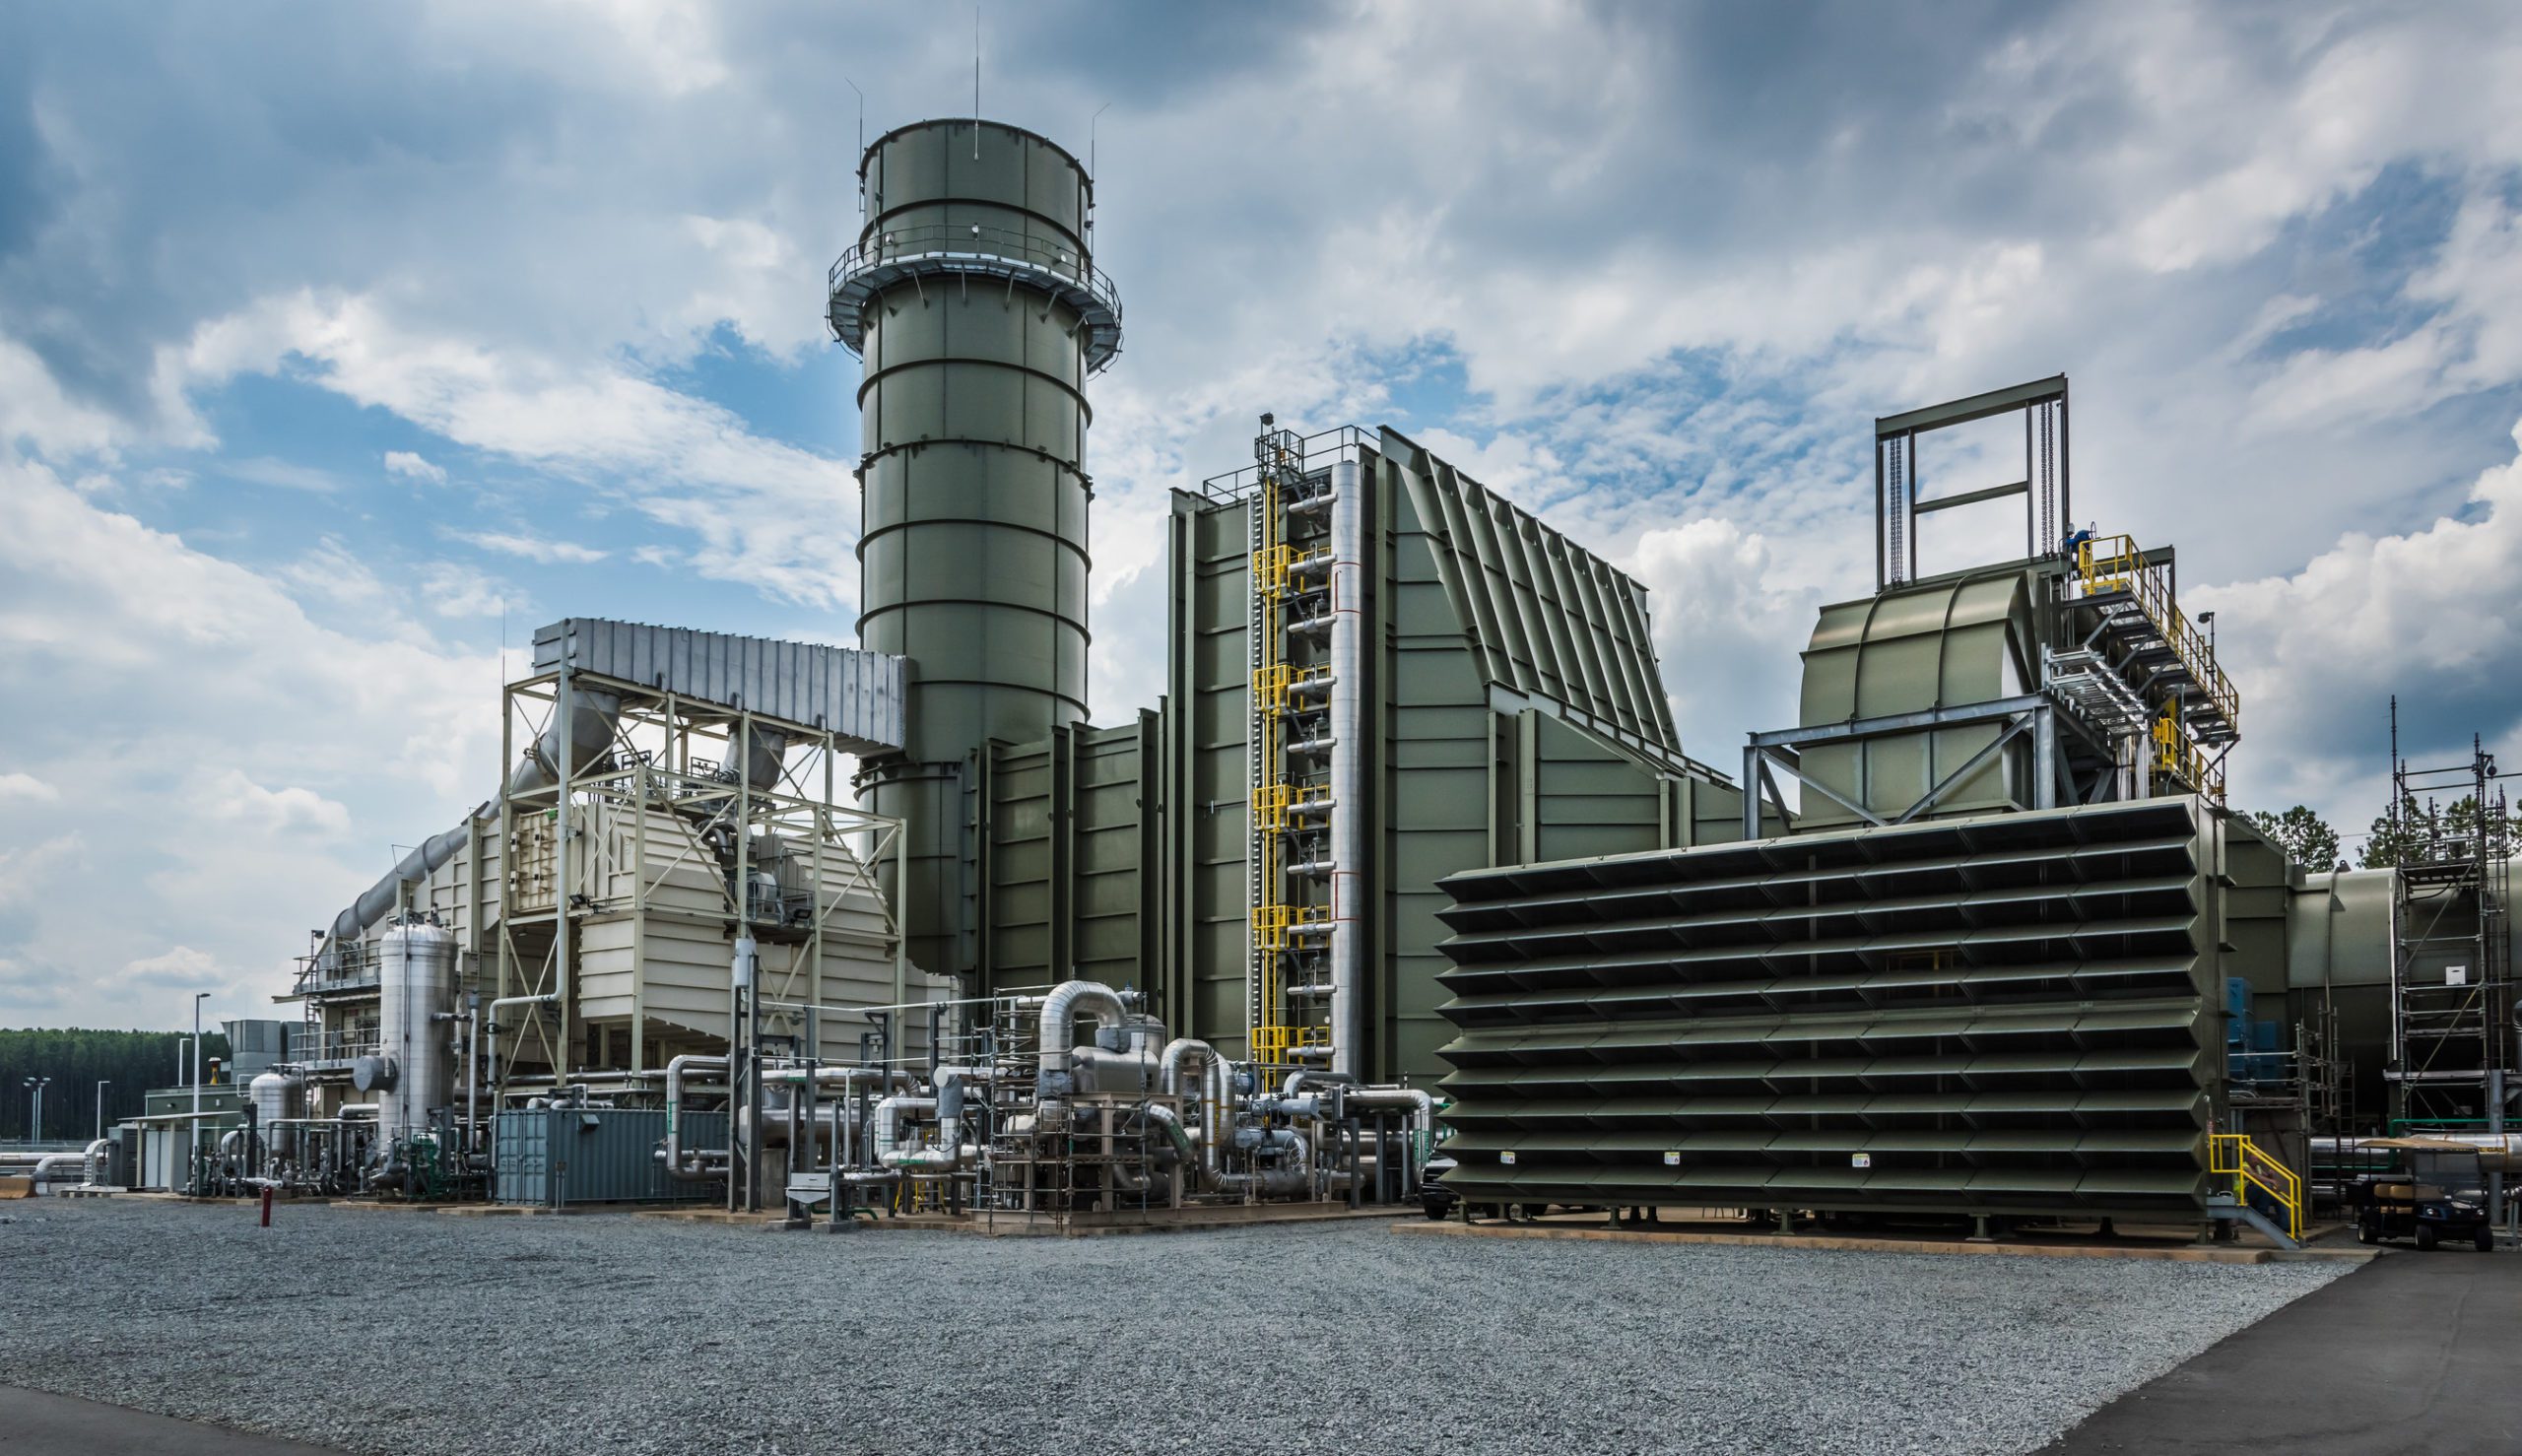 Simple-cycle gas plant in North Carolina achieves Guinness World Records title